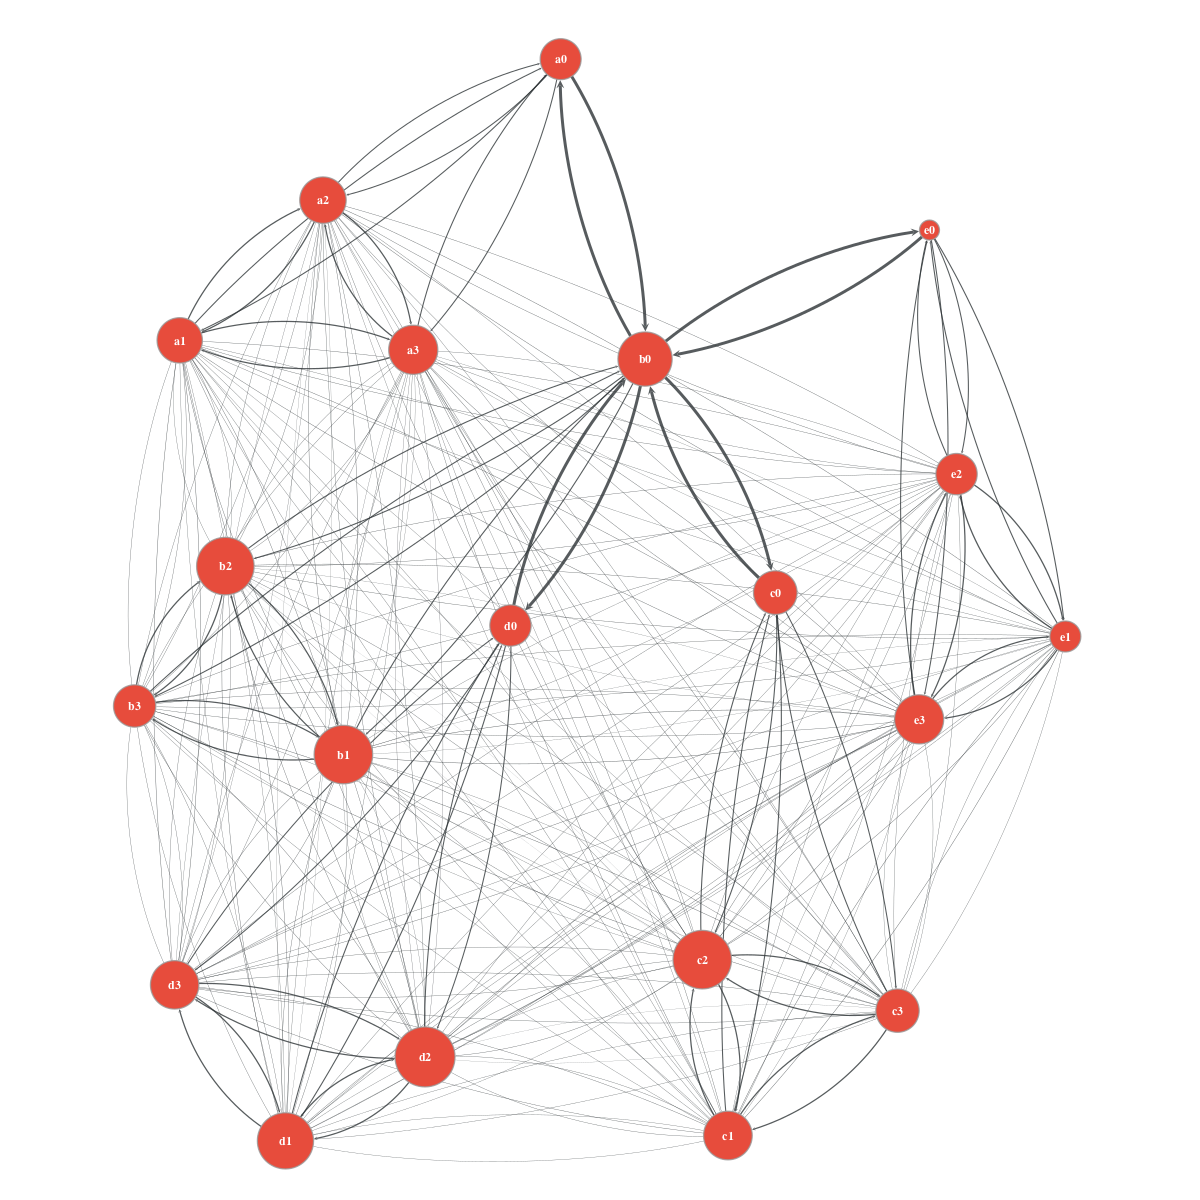 A Directed Graph Visualization Generated by Graph-Tool